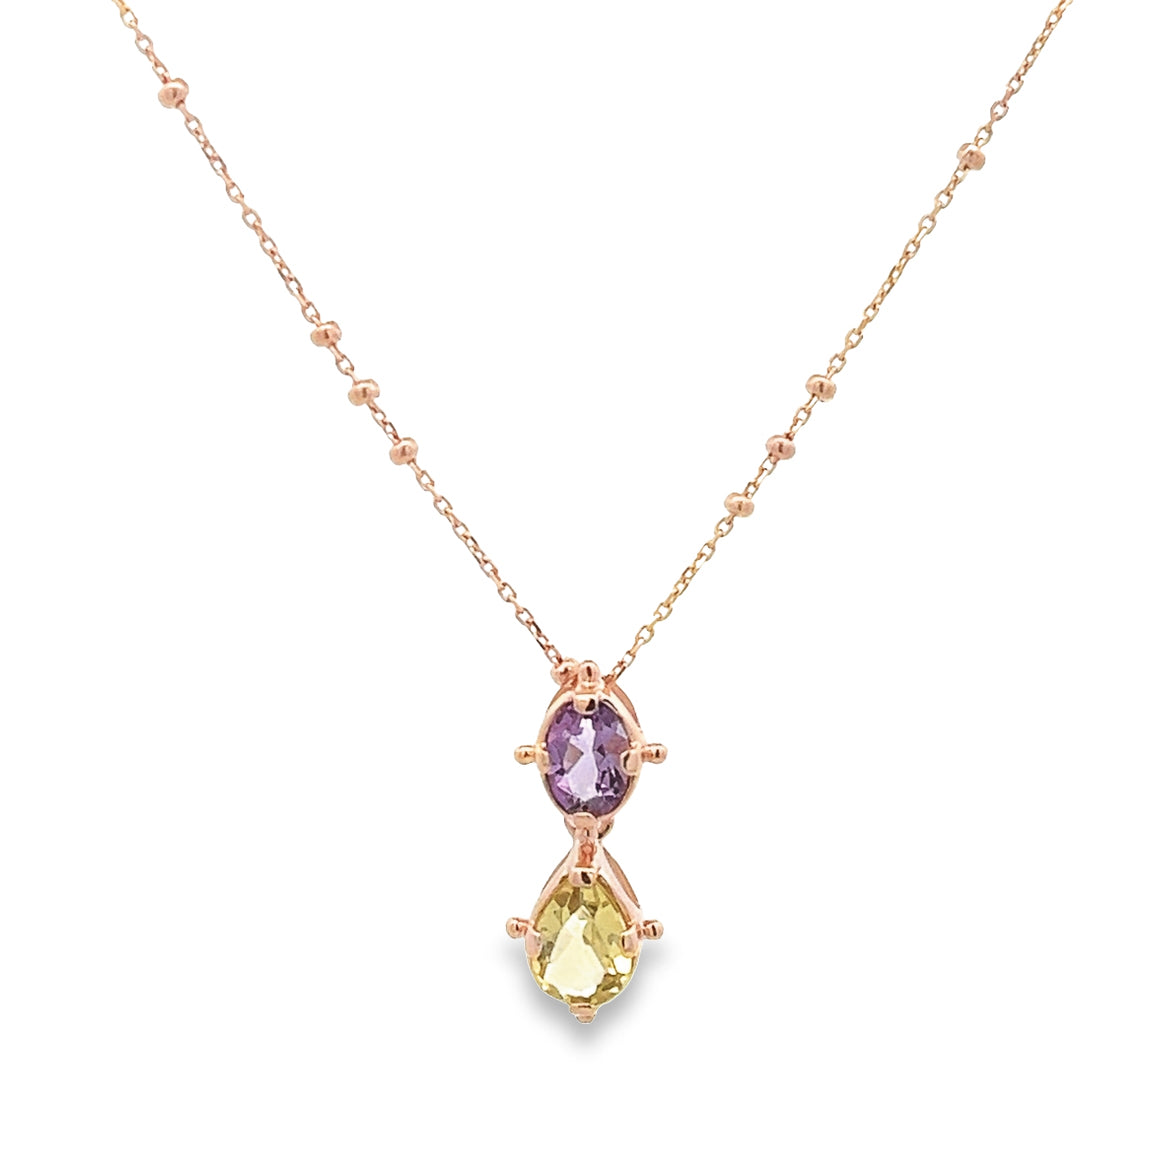 925 SILVER ROSE GOLD NECKLACE WITH OVAL CUT AMETHYST AND PEAR CUT LEMON QUARTZ